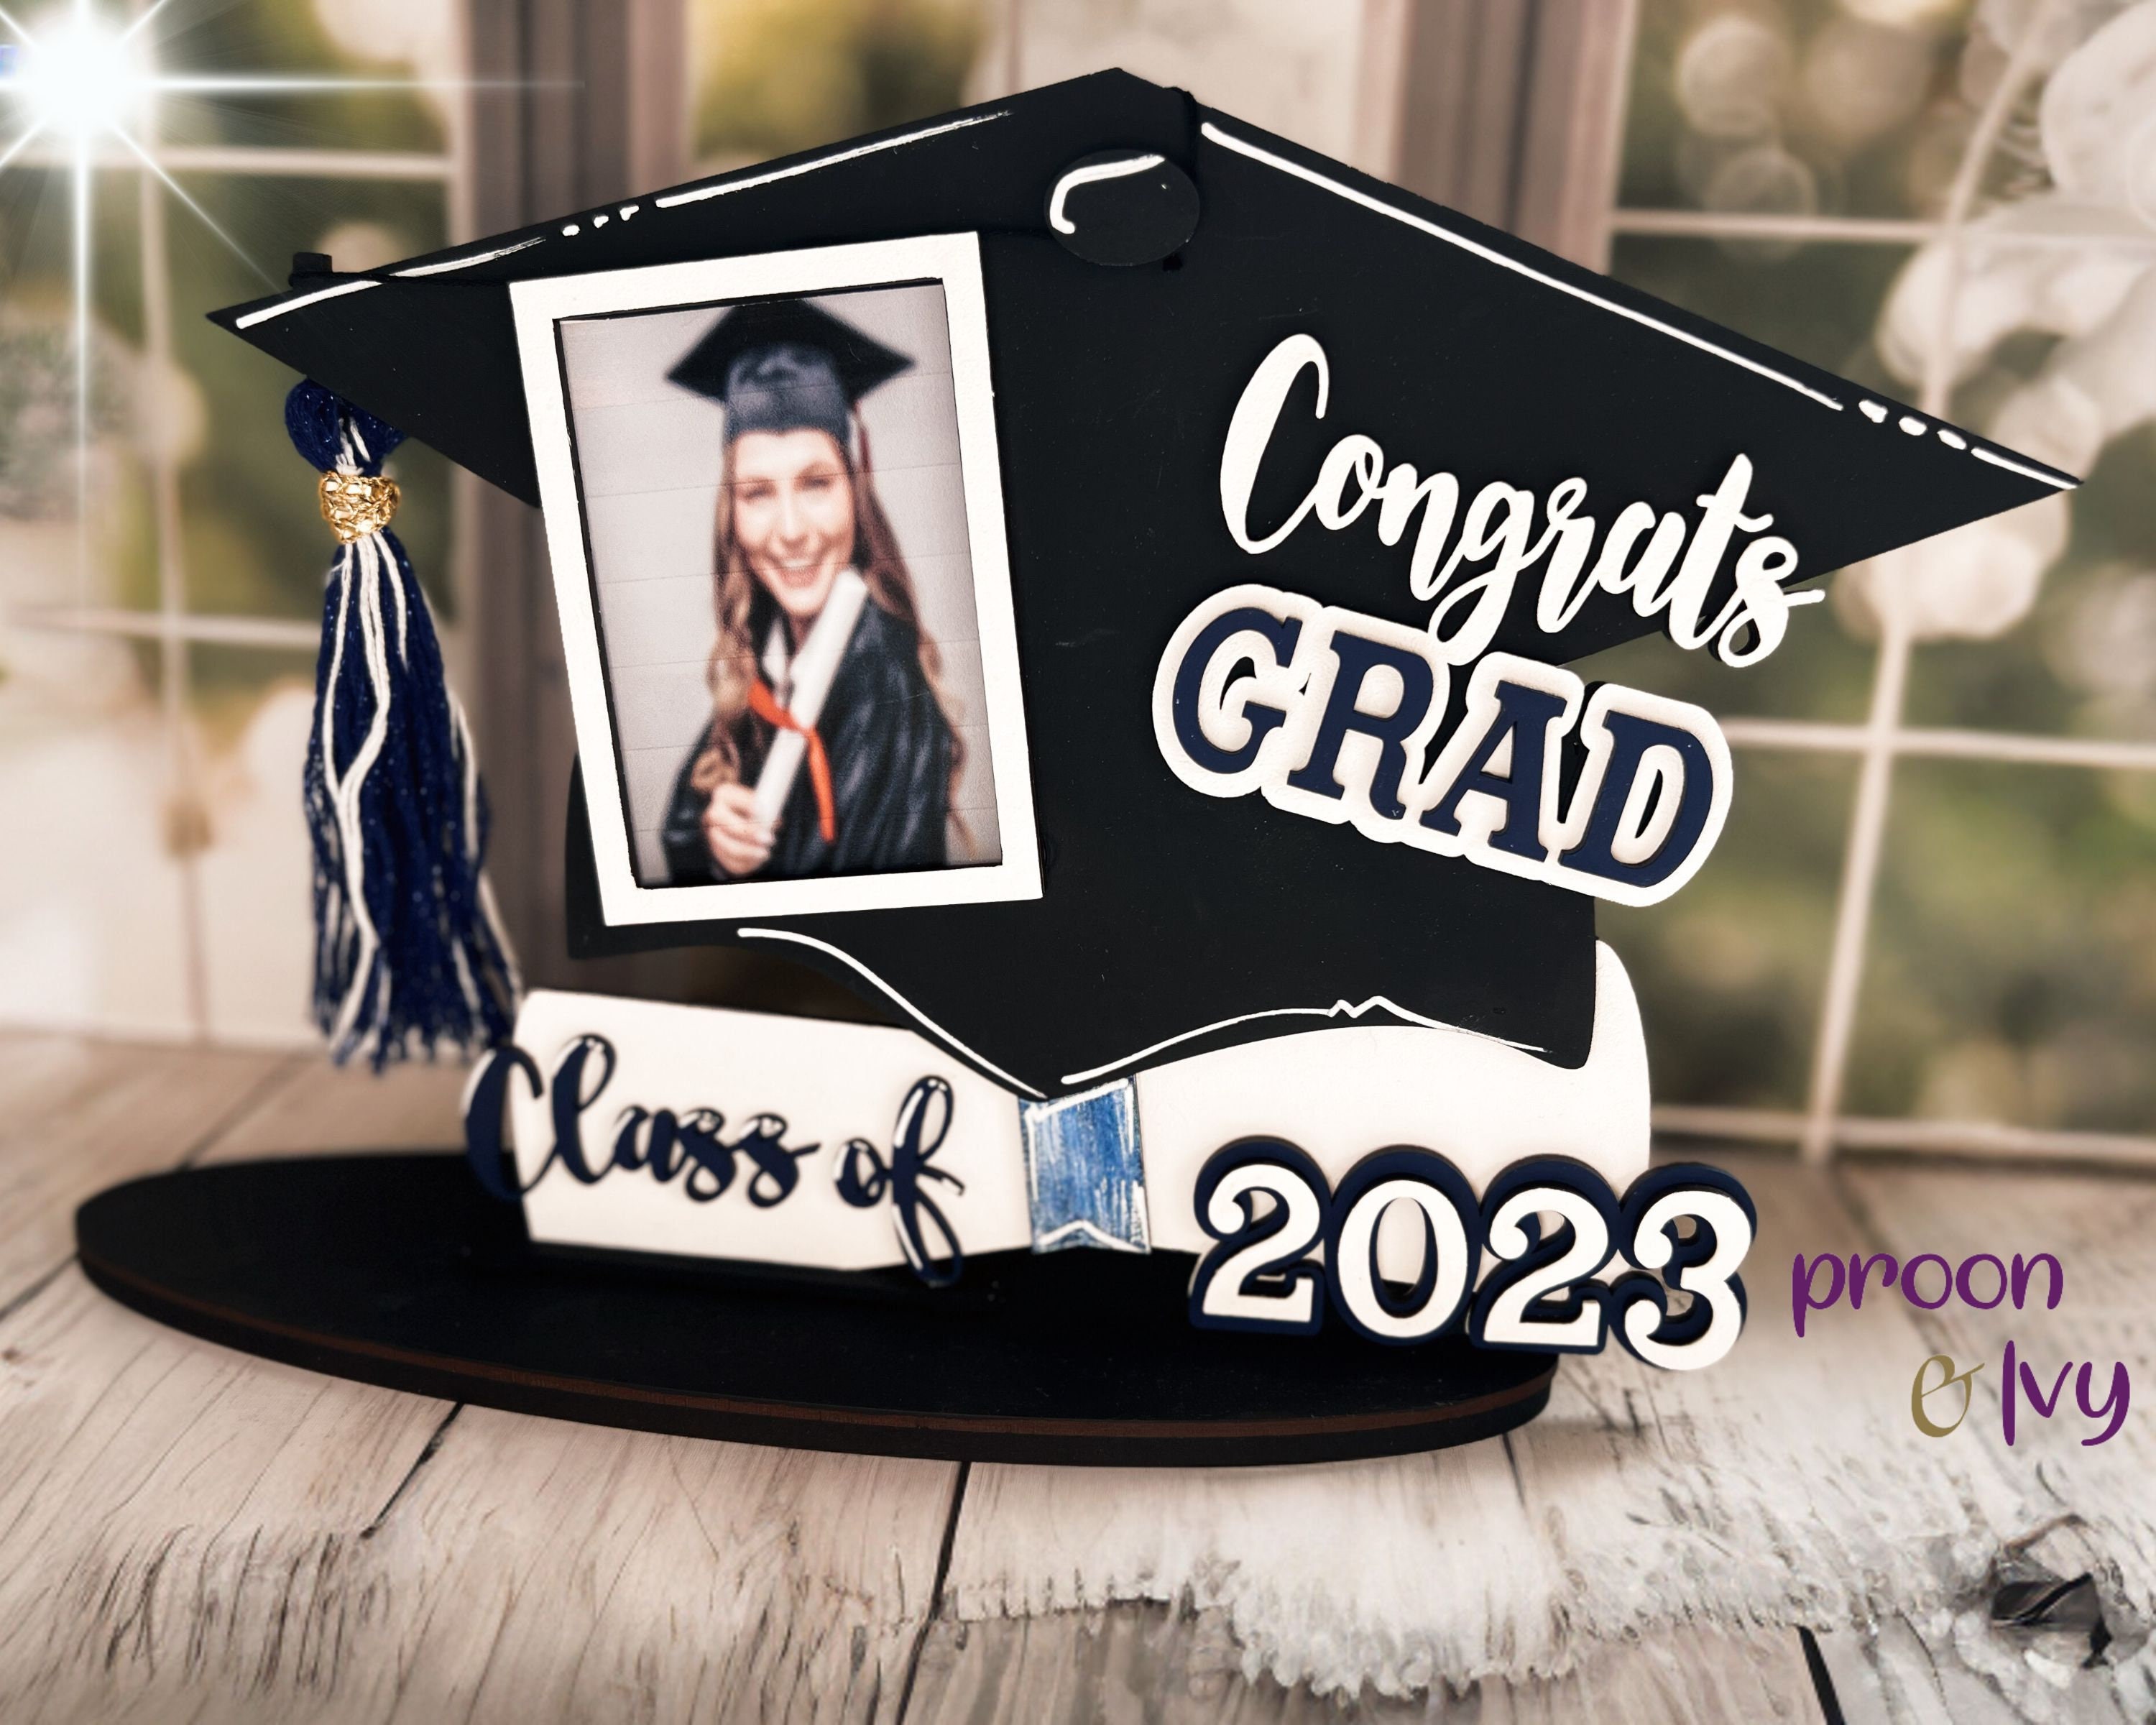 Buy Graduation Cap and Tassel Picture Frame, Unfinished Wood Craft